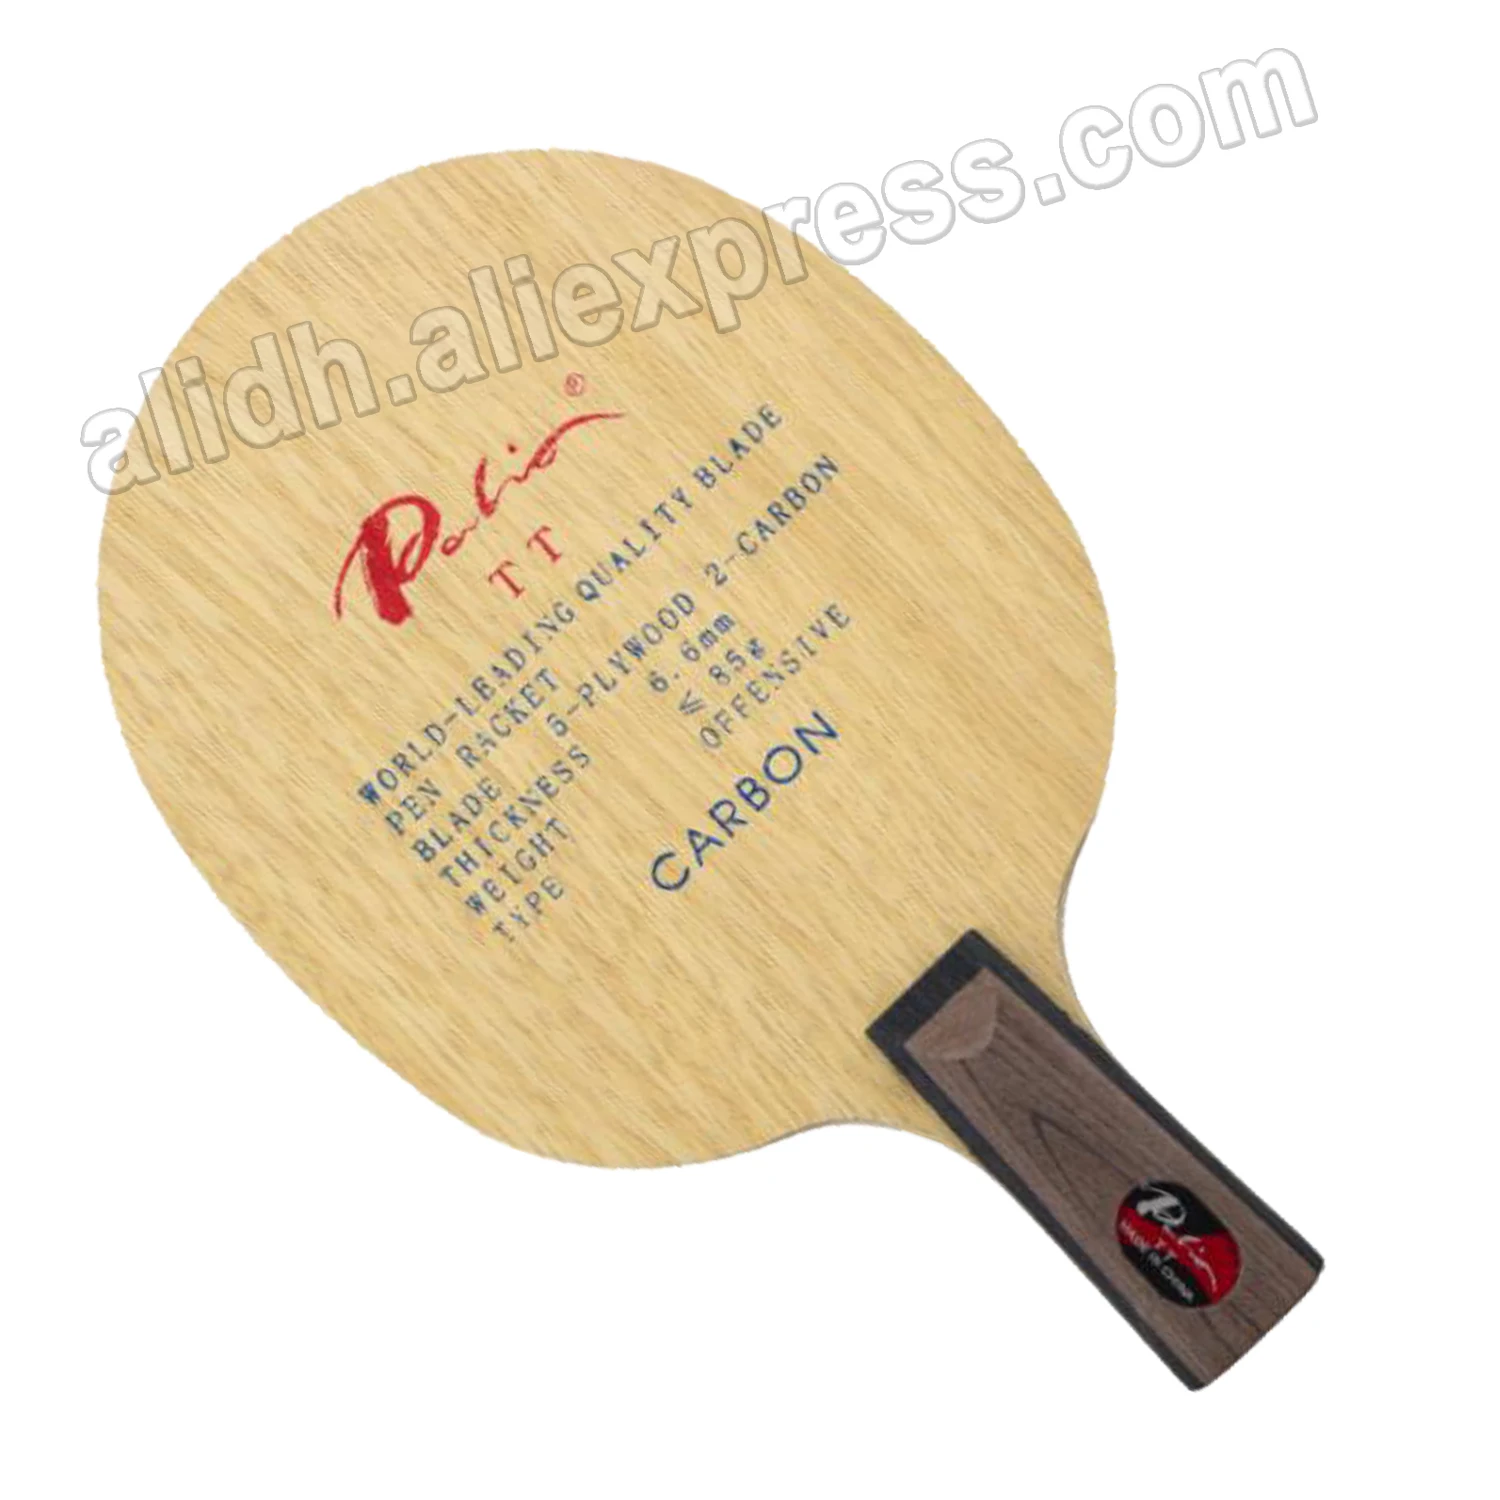 

Palio official TT table tennis balde carbon blade fast attack with loop good speed and hold ball ping pong game